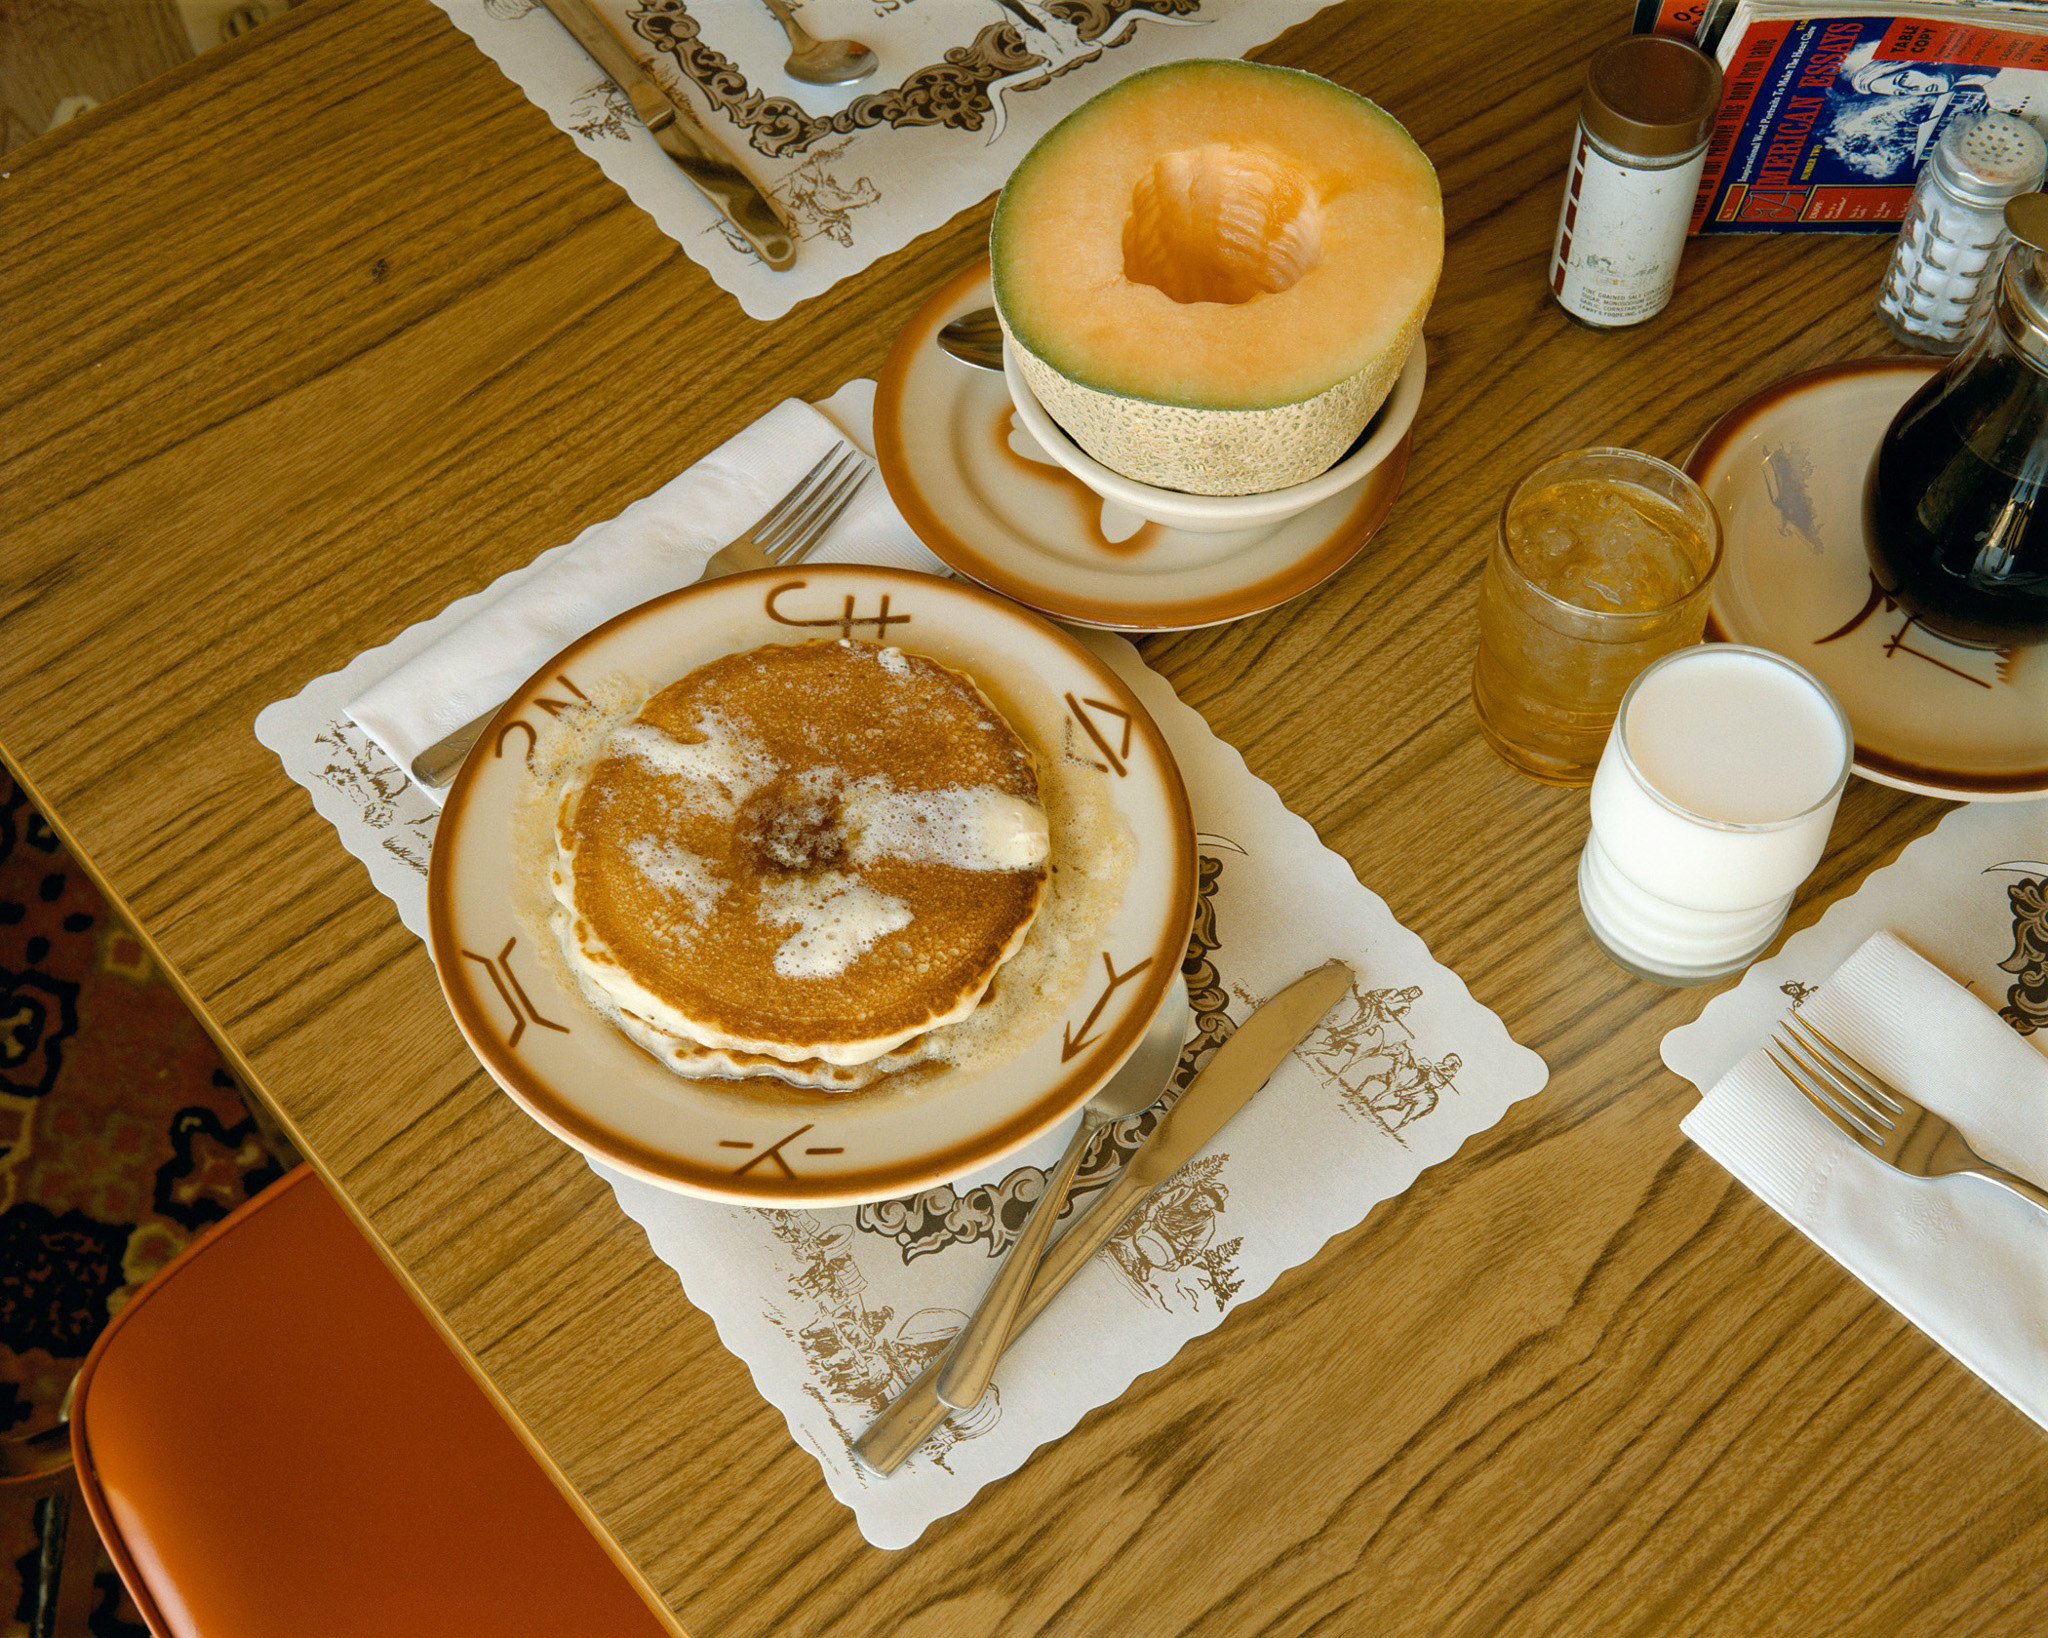 Pancakes, a melon, coffee, and juice at a restaurant